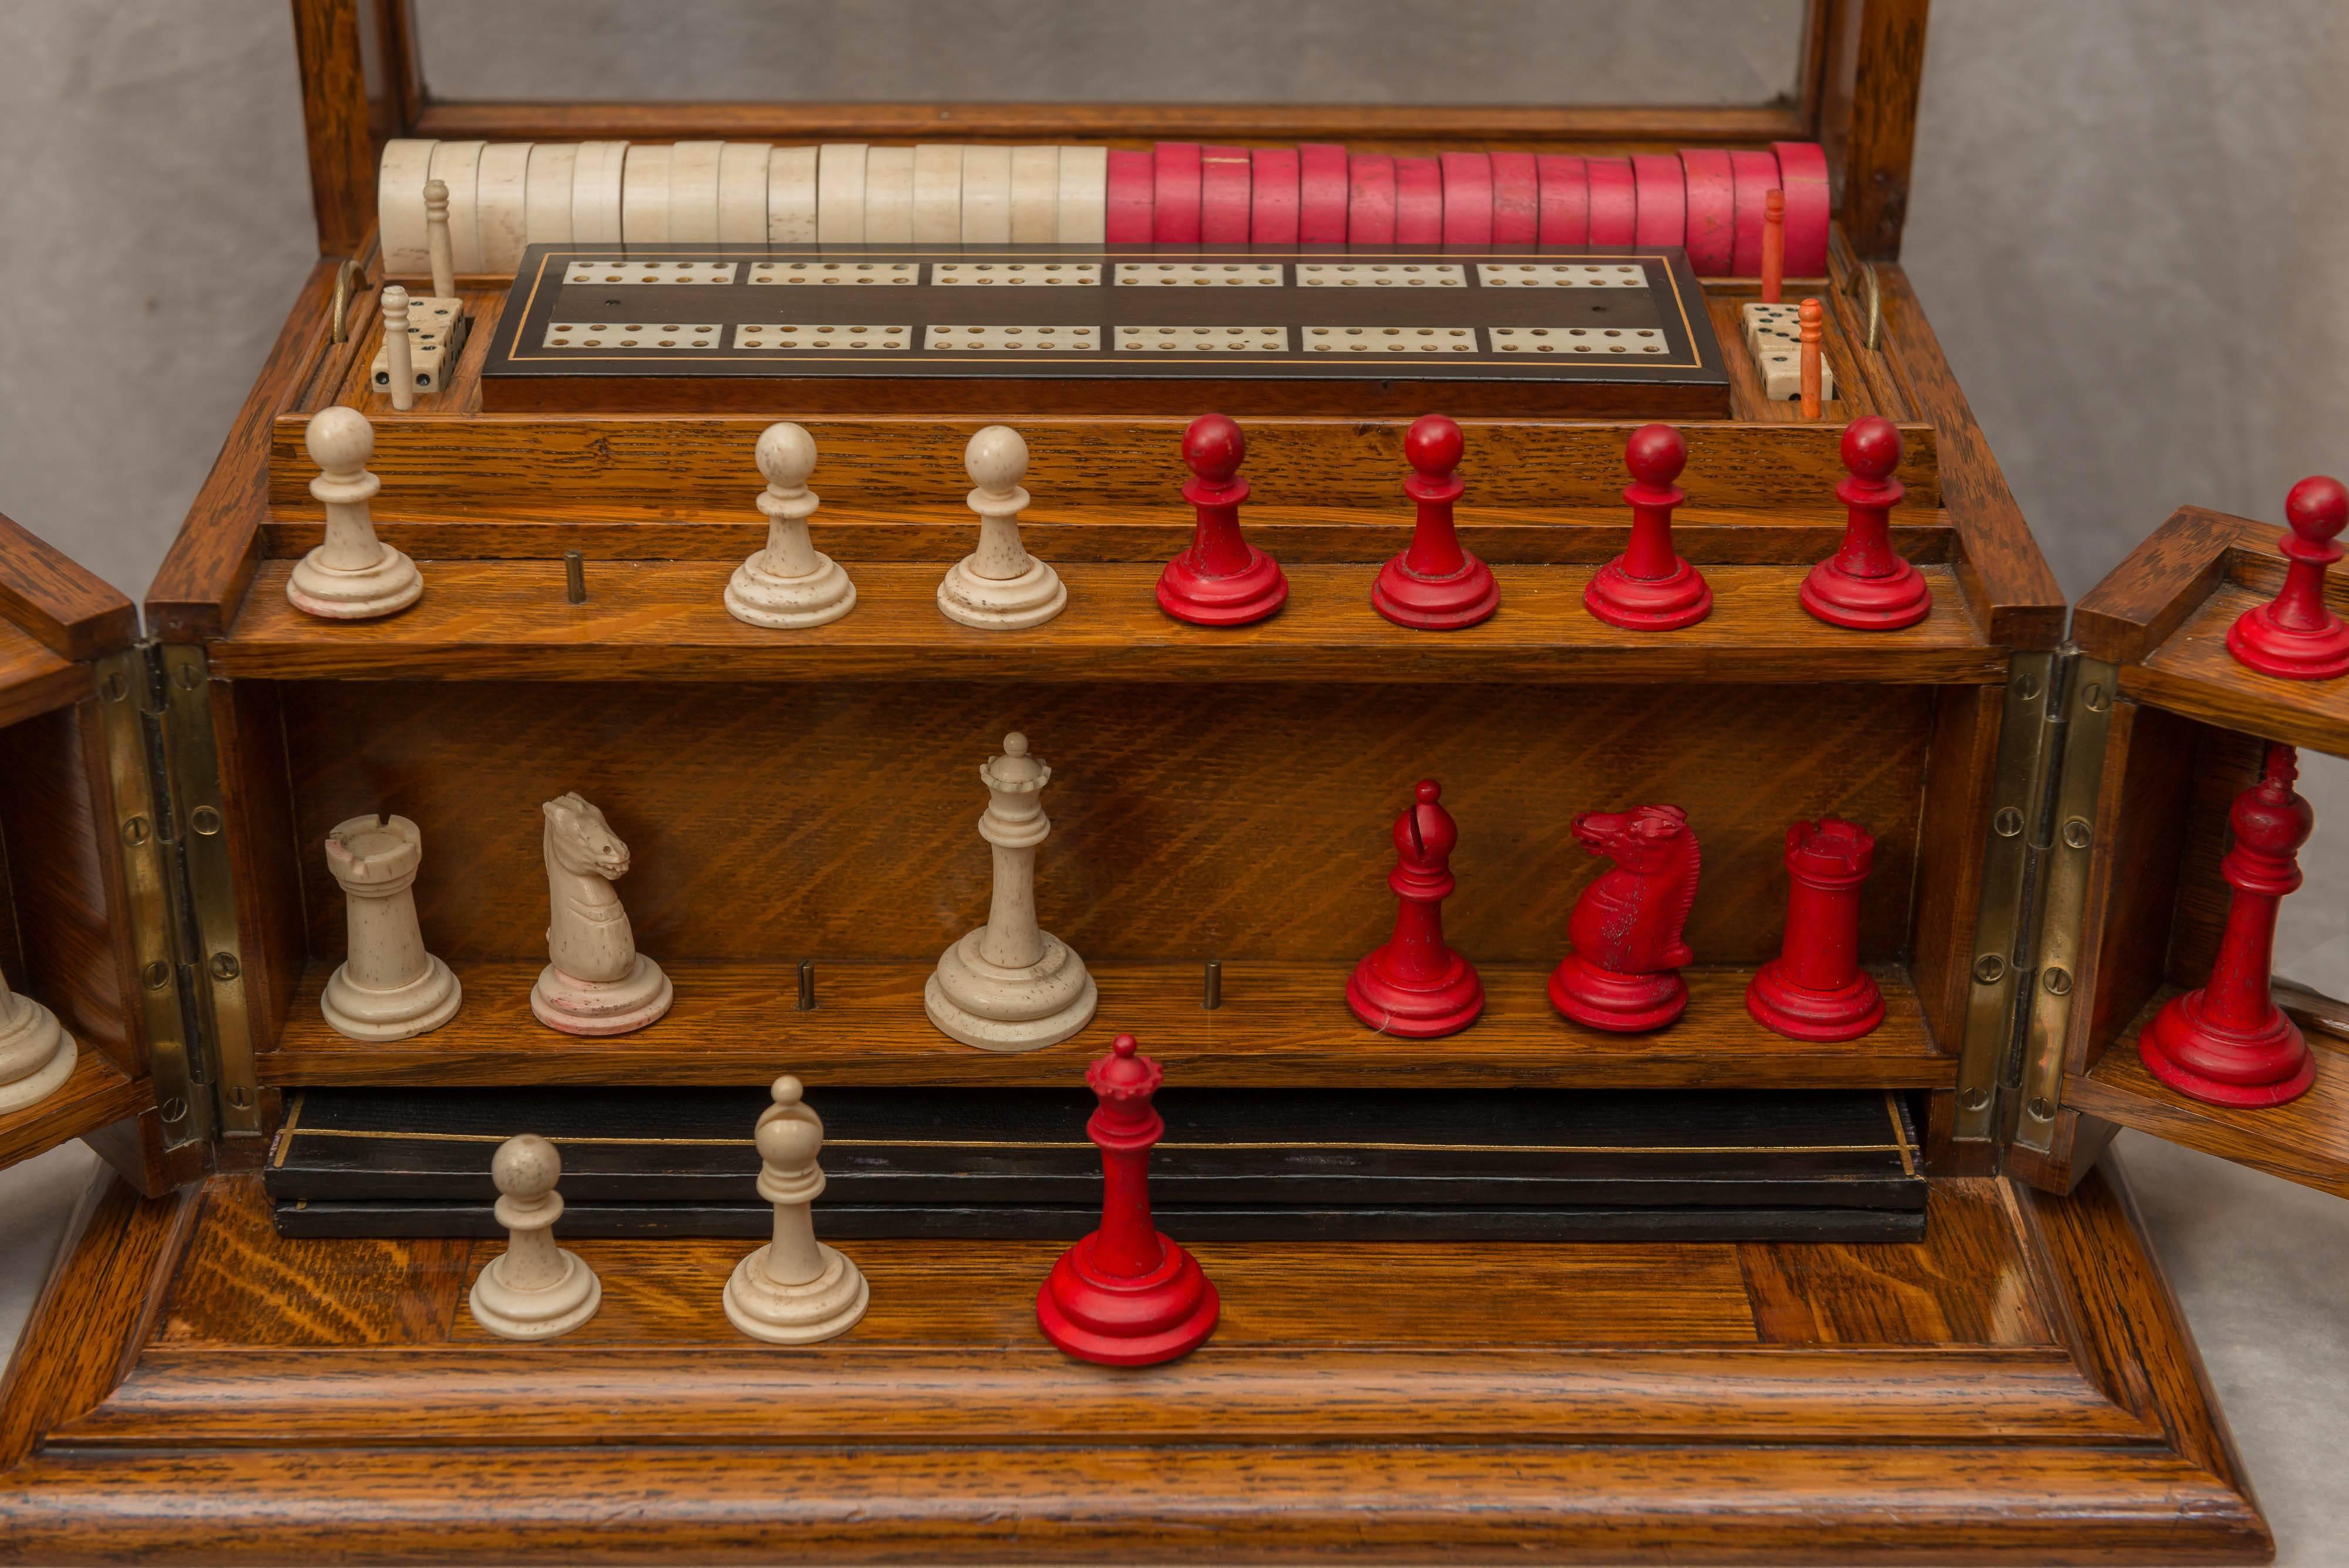 Edwardian Oak Box With Multiple Games, Chess, Checkers, Backgammon and Many Others